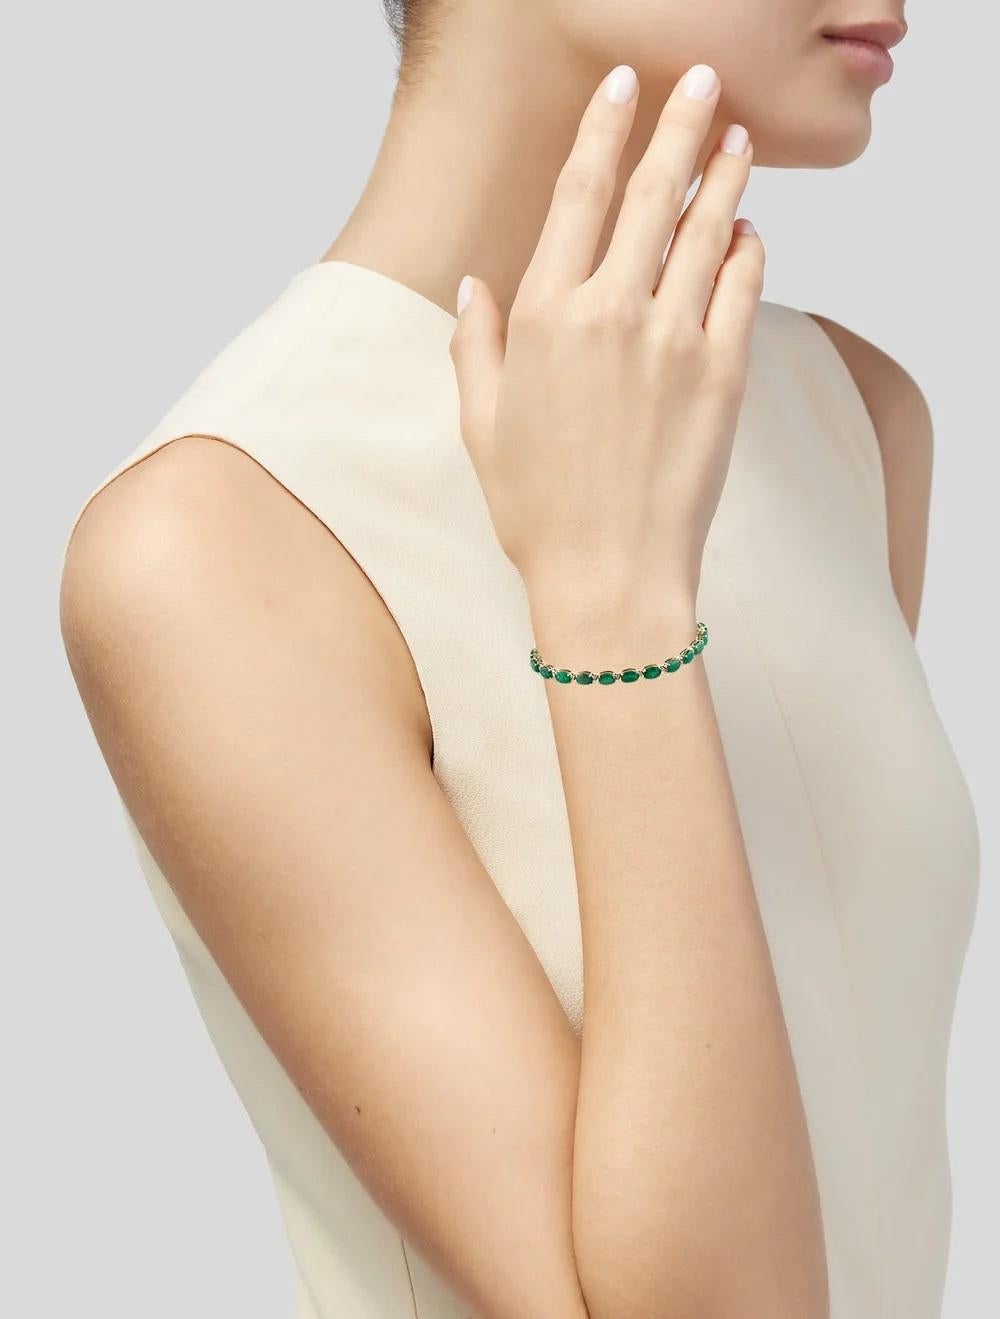 Indulge in opulence with this exquisite 14K yellow gold link bracelet, adorned with a magnificent 14.96 carat oval modified brilliant emerald as its focal point. Crafted to perfection, this bracelet exudes sophistication and